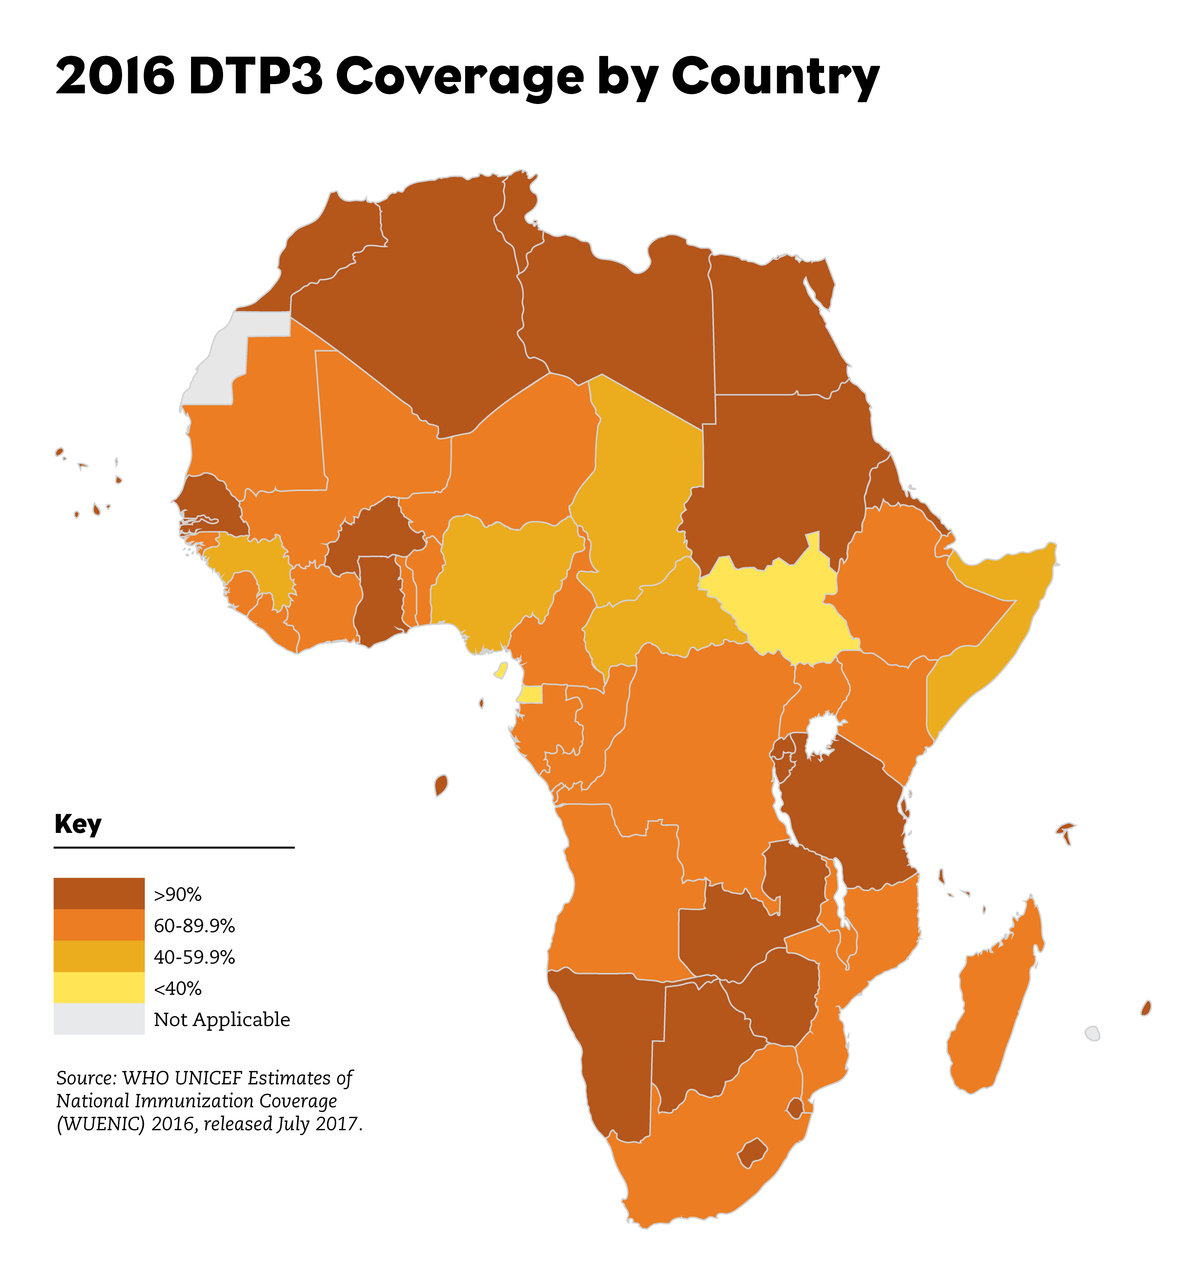 2016 DTP3 Coverage - Africa